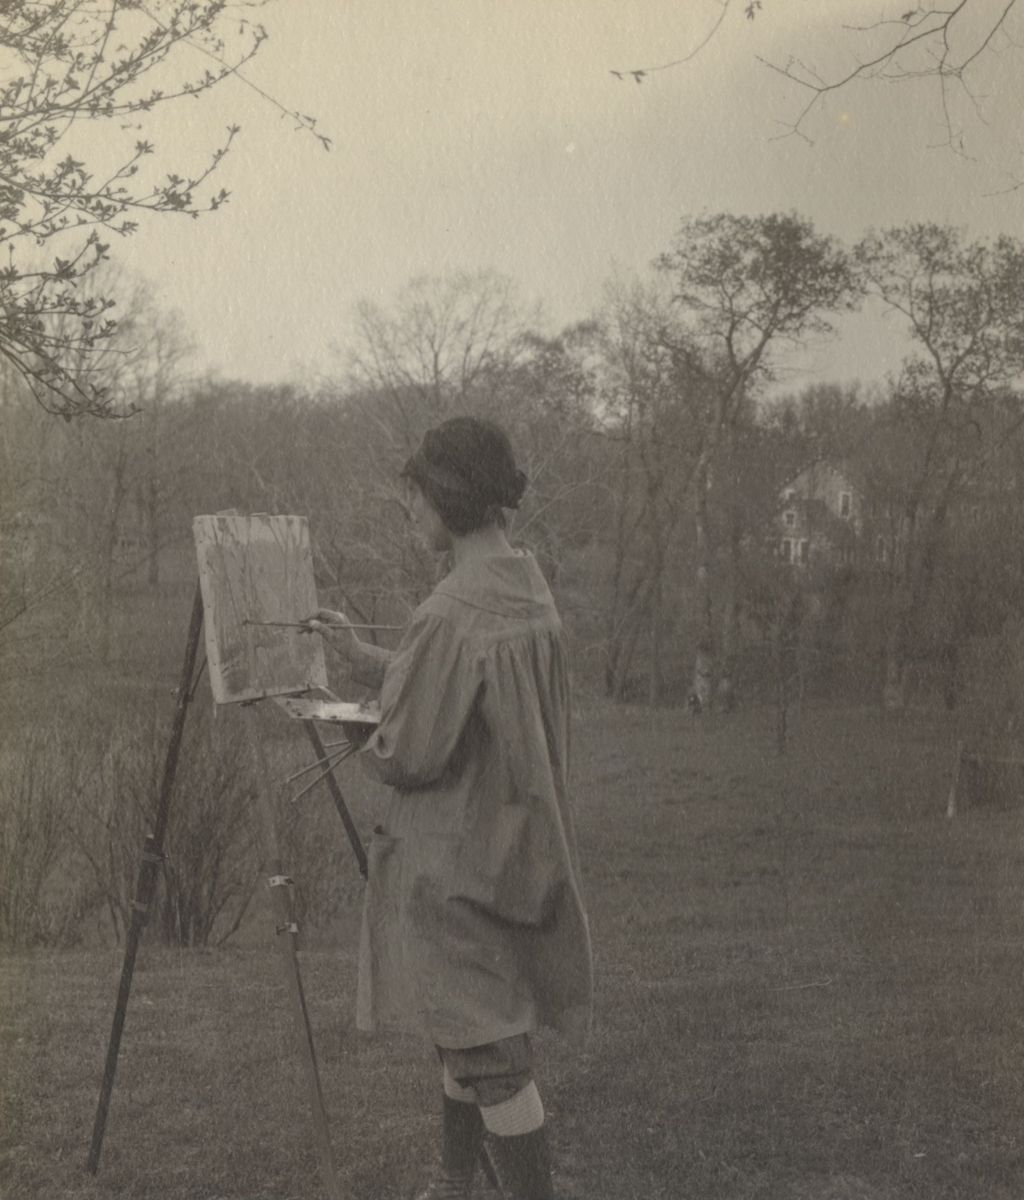 Miniature of Hull-House art instructor Sadie E. Garland (later Dreikurs) painting at Bowen Country Club